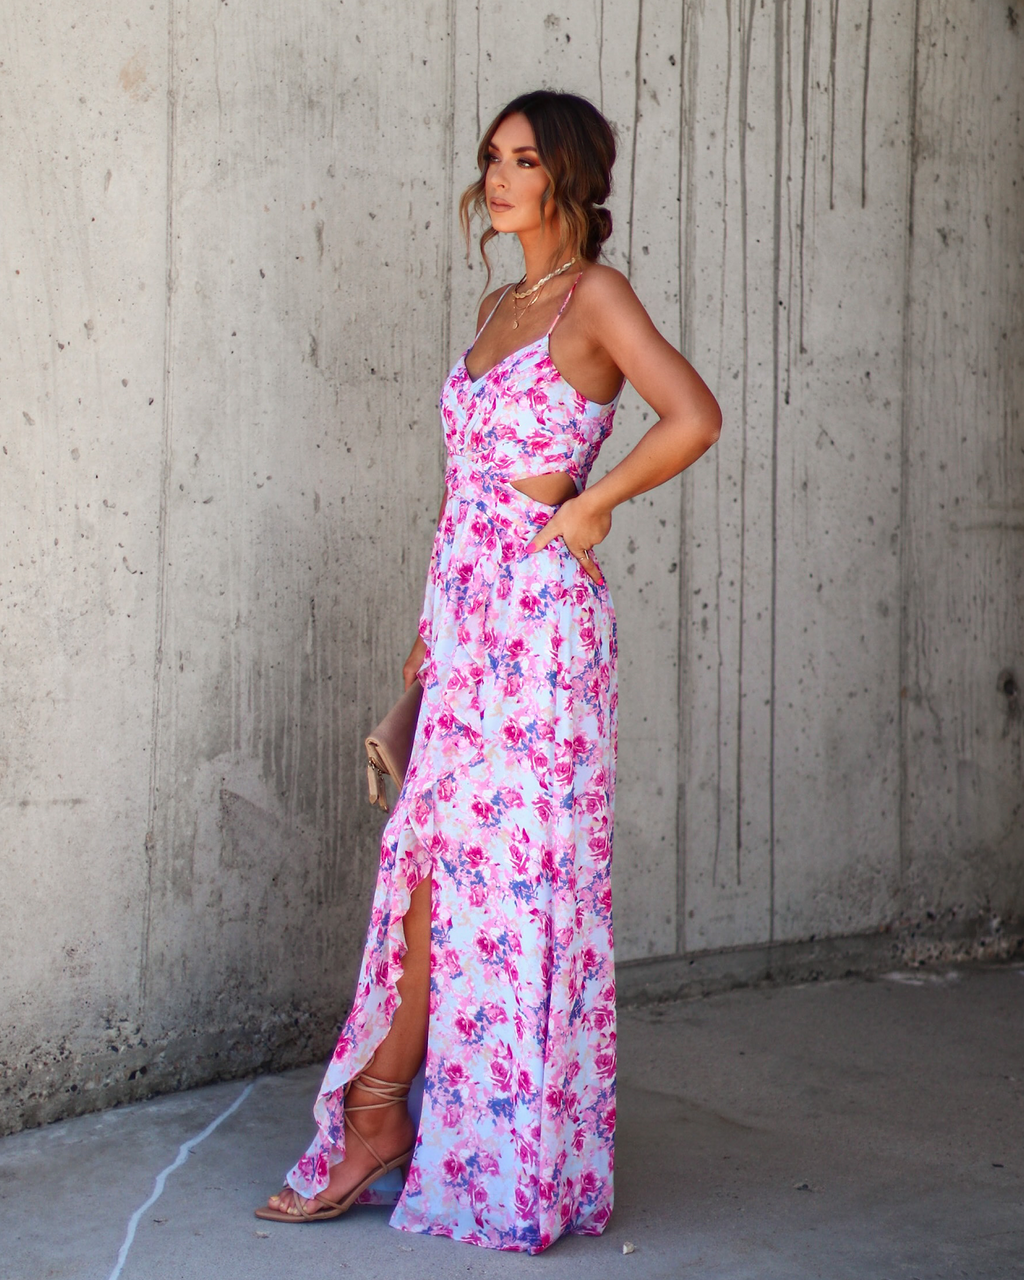 VICI - PREORDER // BESTSELLER Zabelle Floral Ruffle Cutout Maxi Dress $98  Sizes S - L Fall in love with our Zabelle Floral Ruffle Cutout Maxi Dress  and you will be summer's